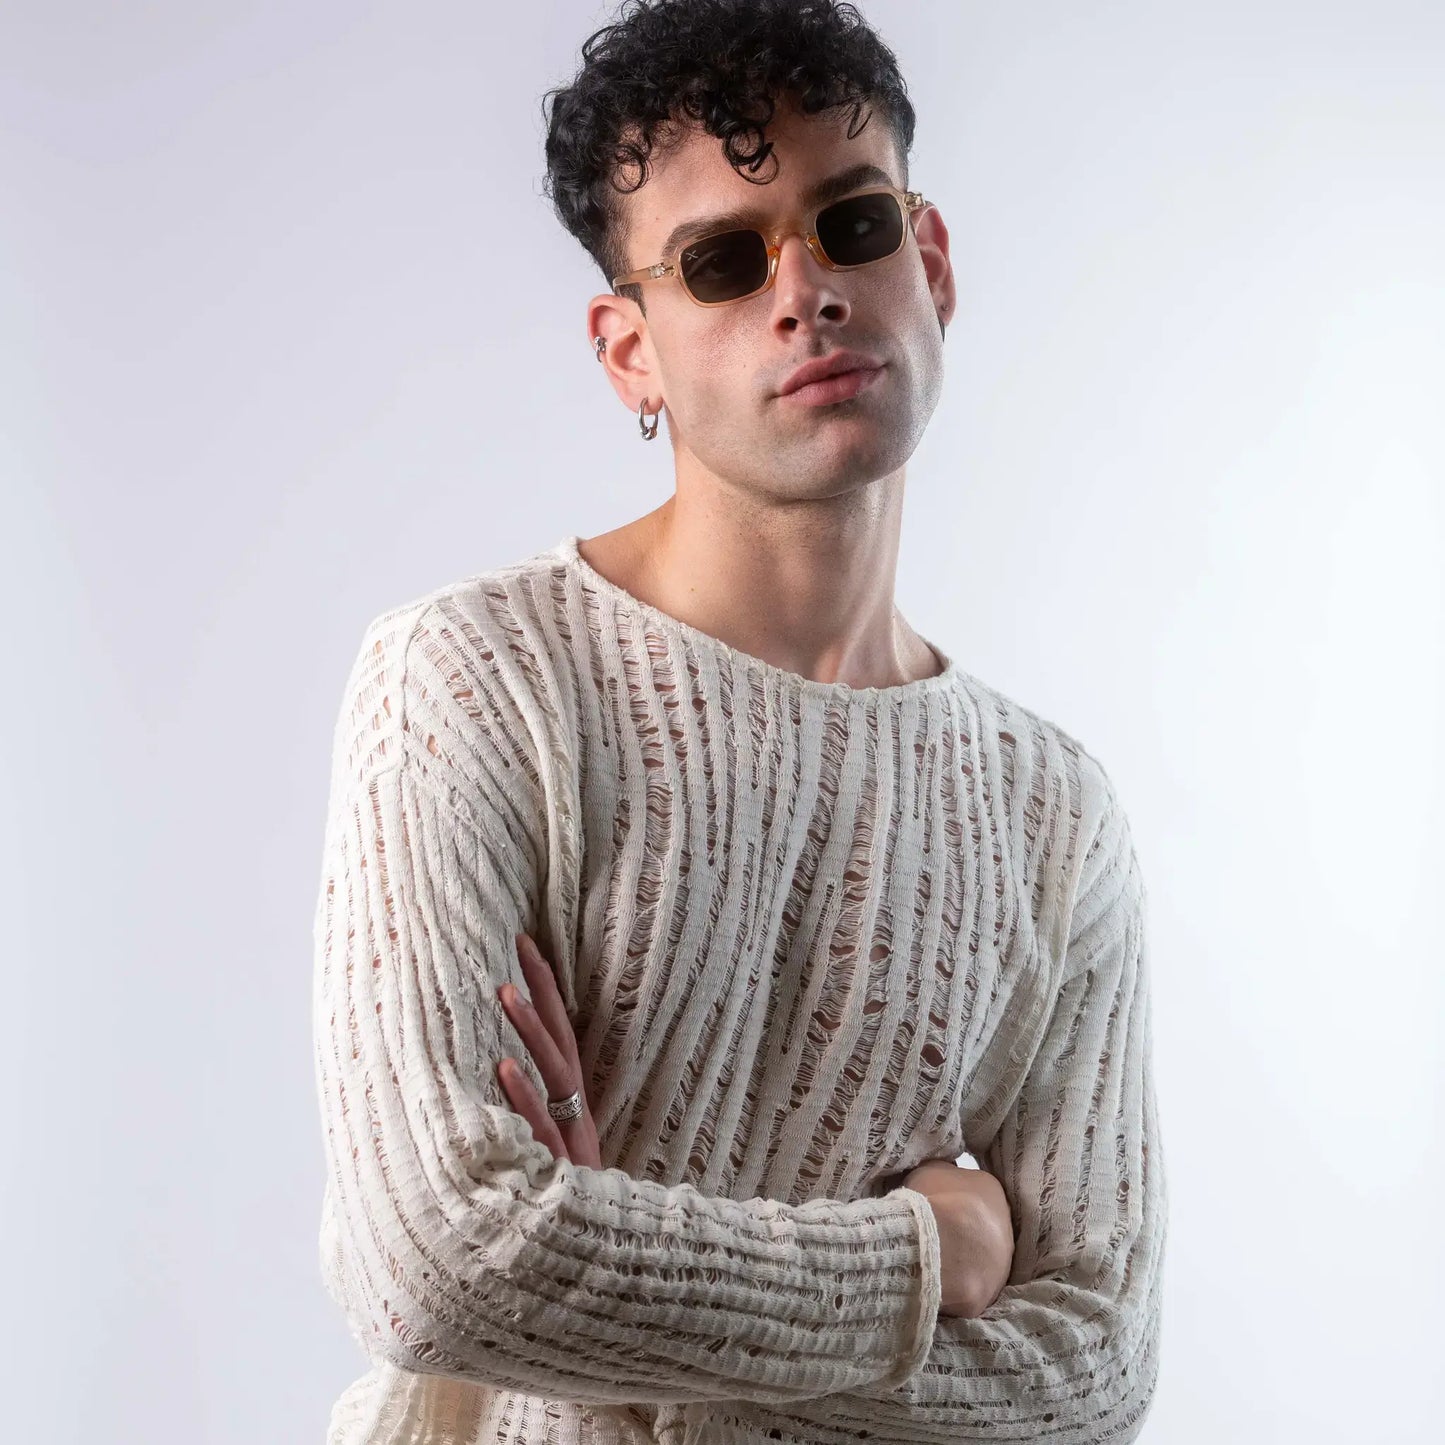 A male model wearing Exposure Sunglasses polarized sunglasses with beige frames and green lenses, posing against a white background.